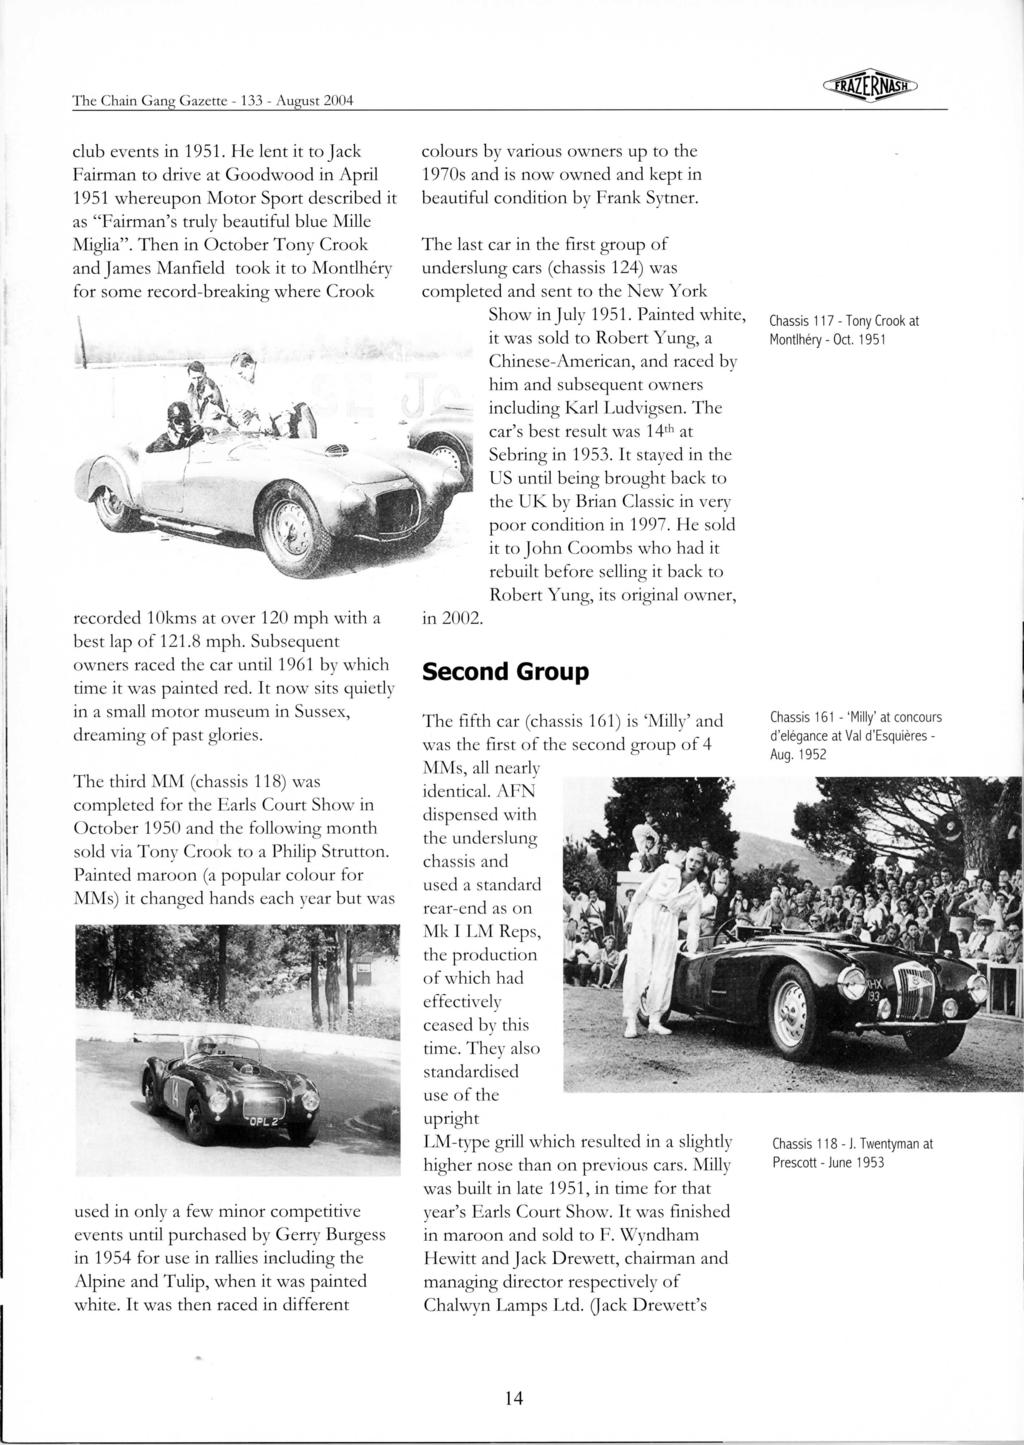 club events in 1951. He lent it to Jack Fairman to drive at Goodwood in April 1951 whereupon Motor Sport described it as "Fairman's truly beautiful blue Mille Miglia".